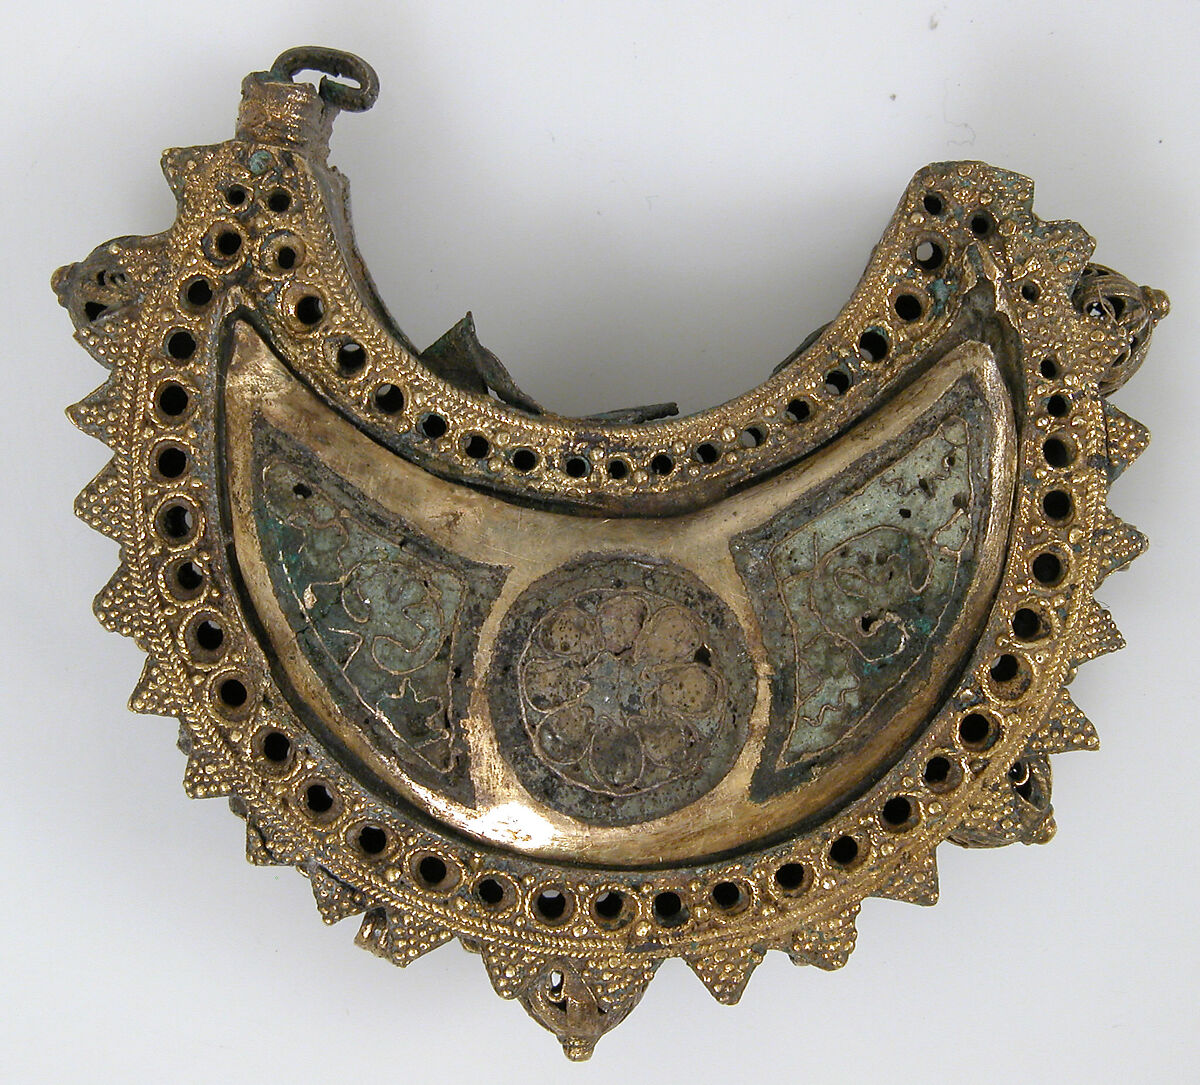 One of a Pair of Crescent-Shaped Earrings with Rosettes, Cloisonné enamel, silver gilt, Kyivan Rus’ or Byzantine 